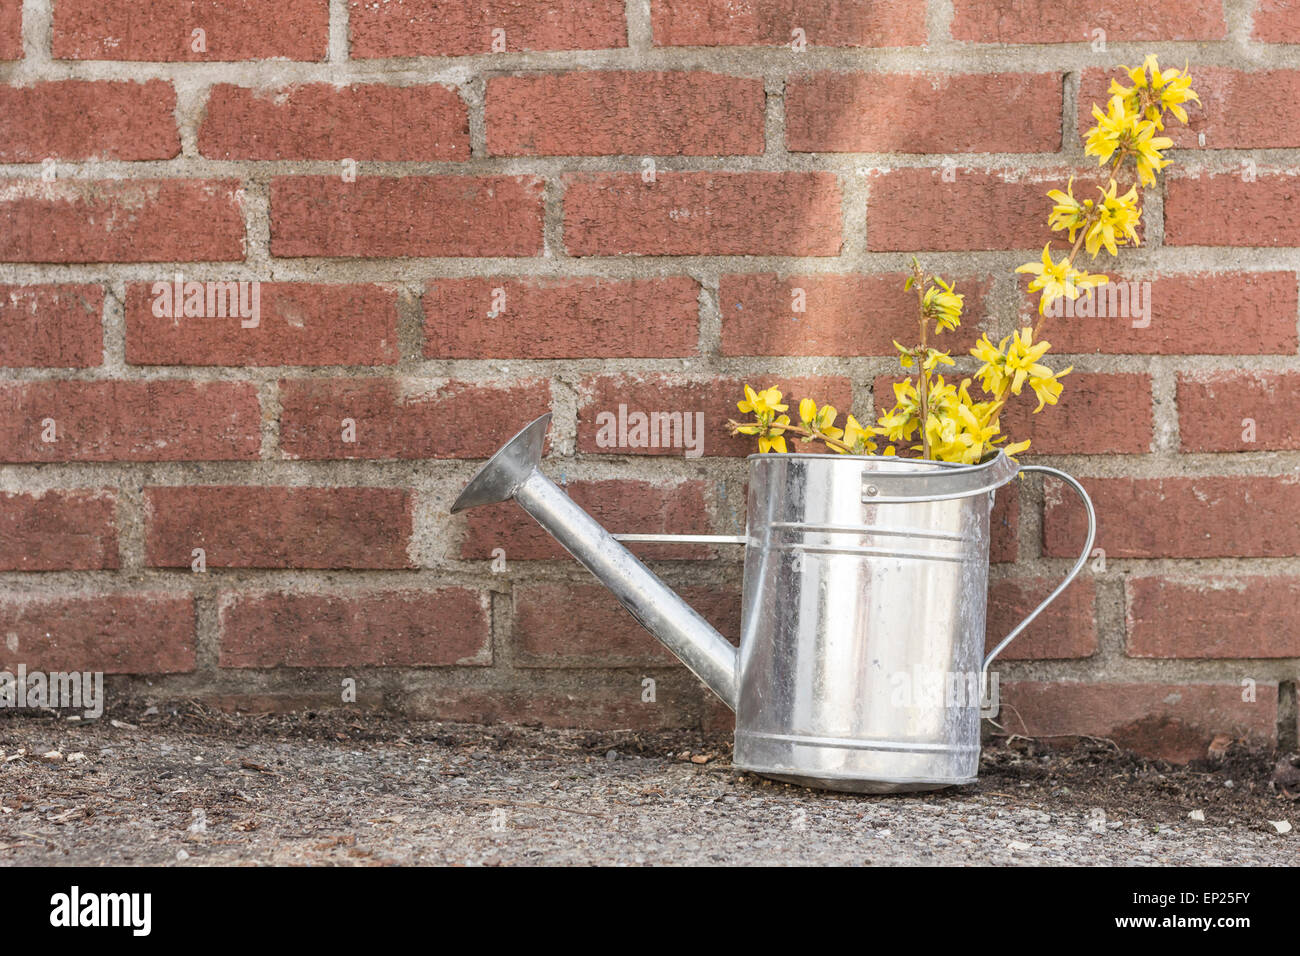 Yellow forsythia bush clippings in a tin watering can Stock Photo